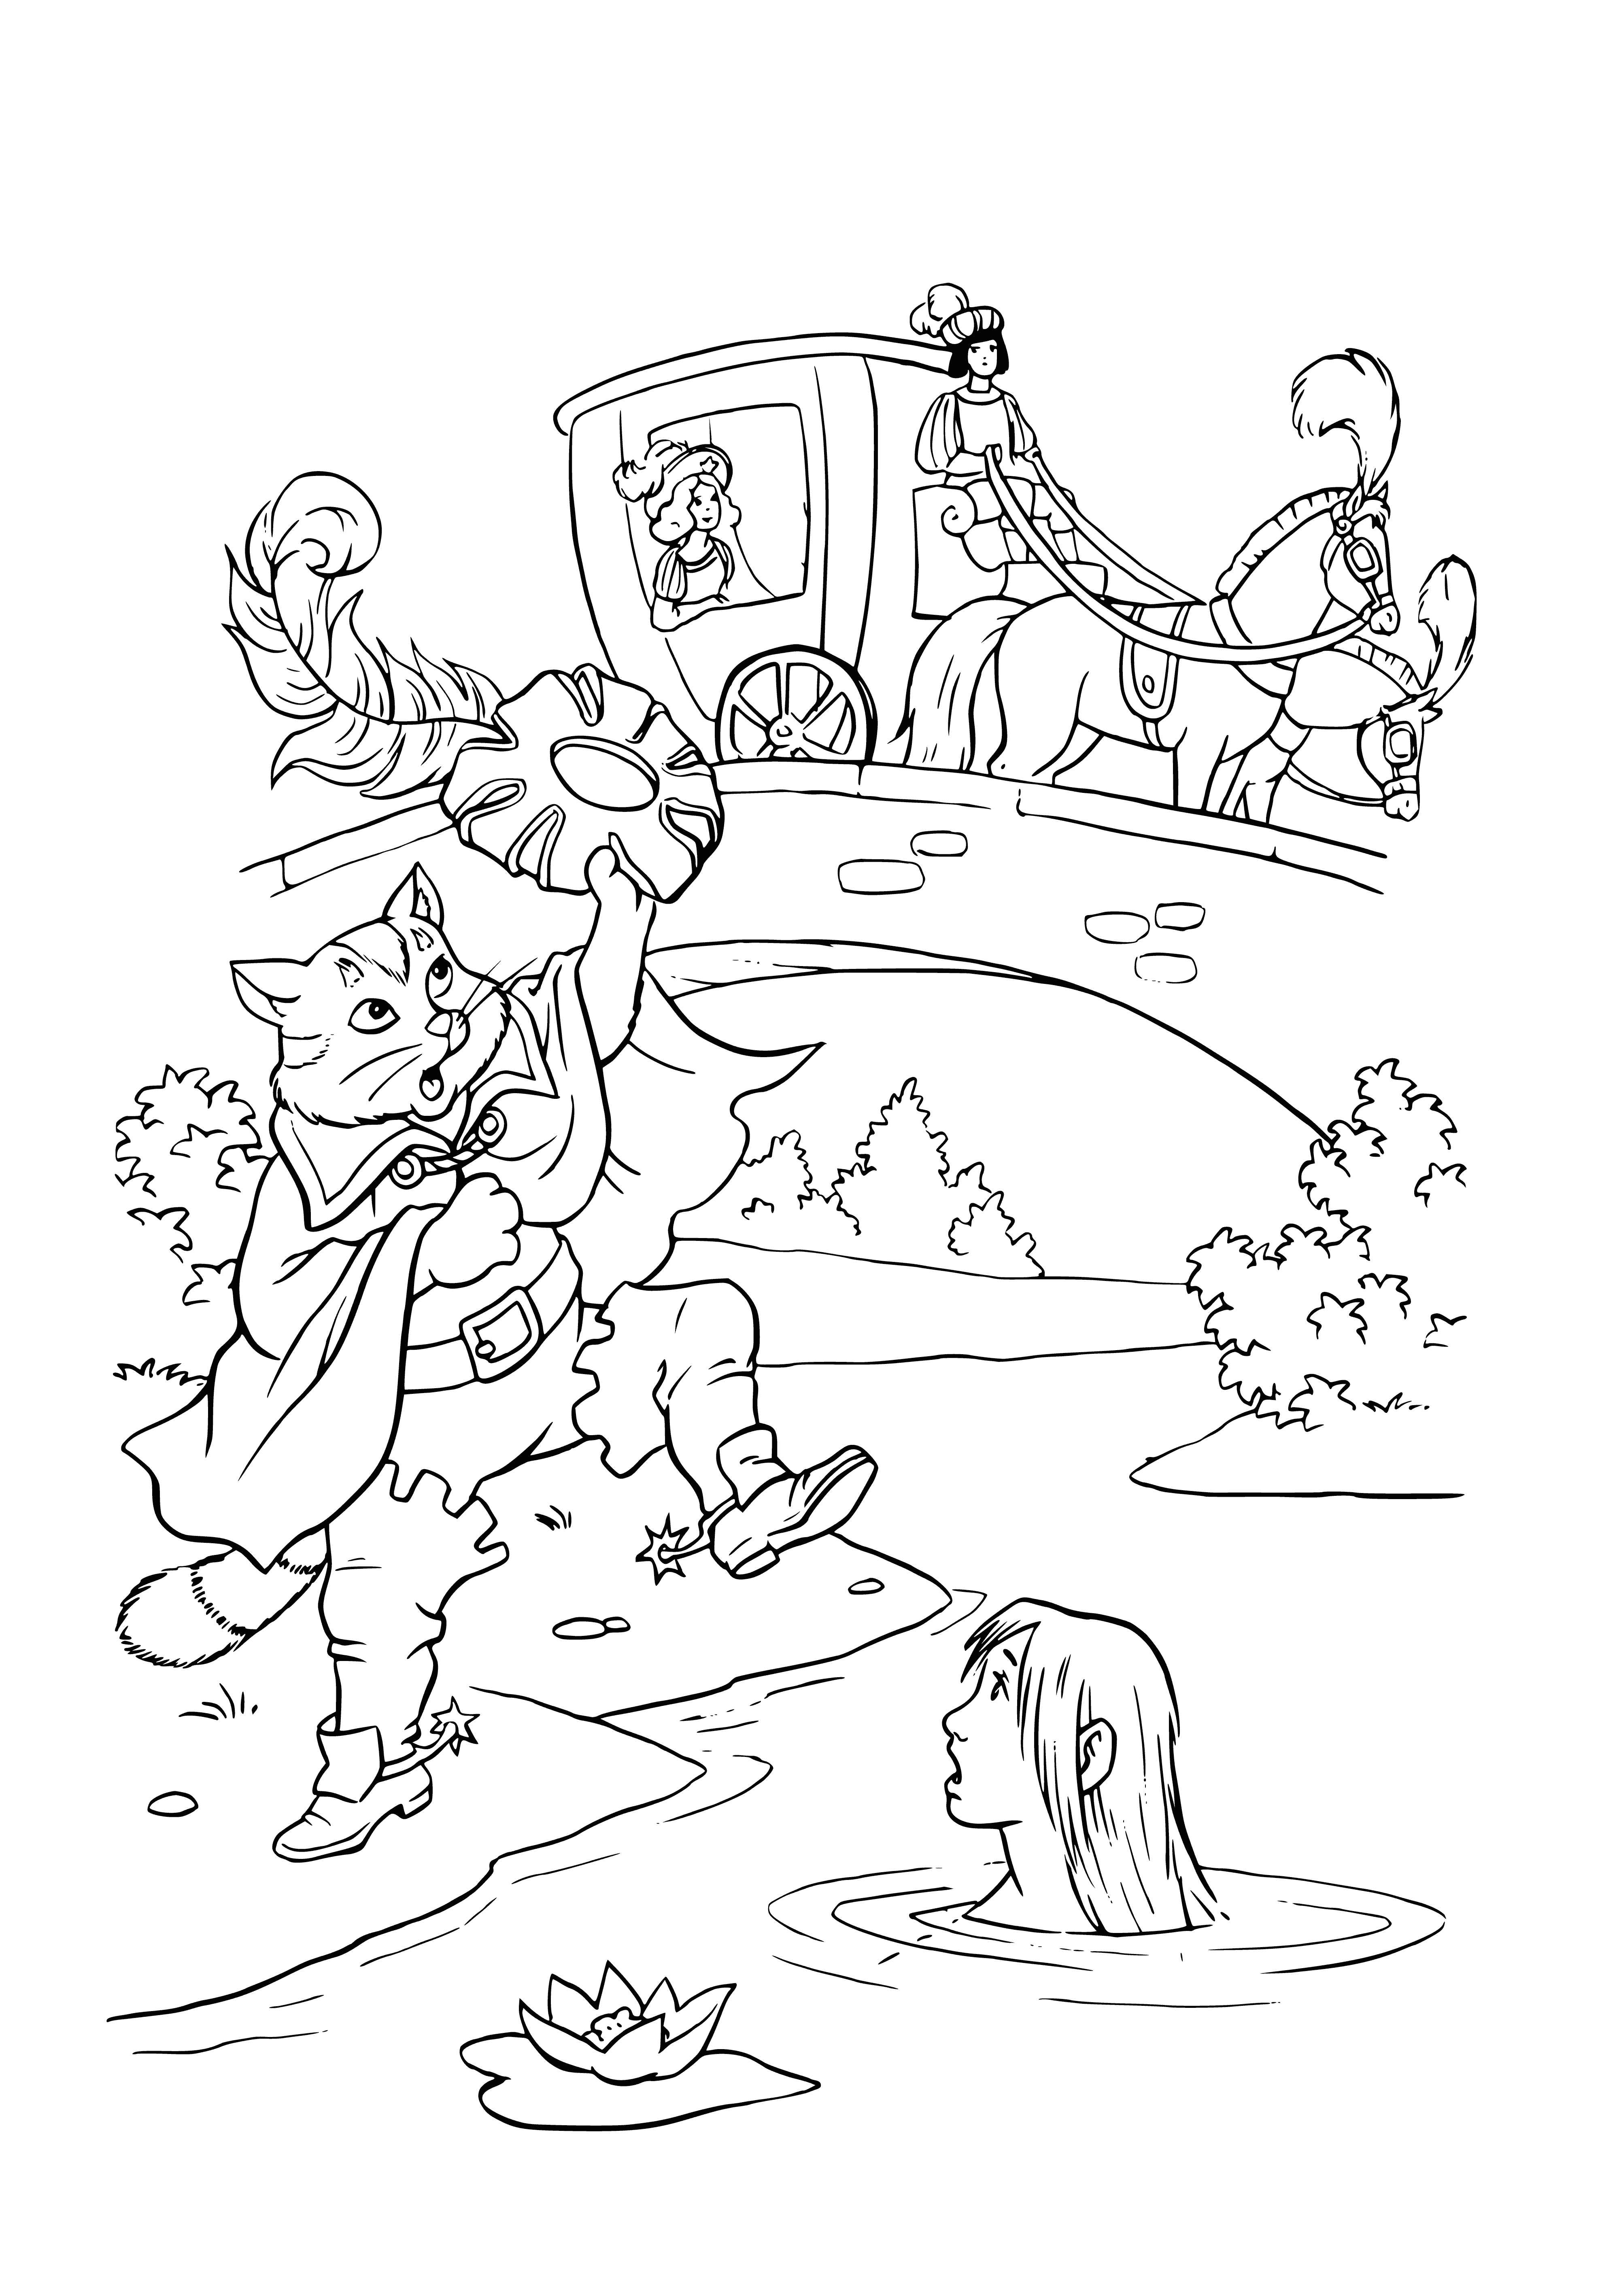 For help coloring page